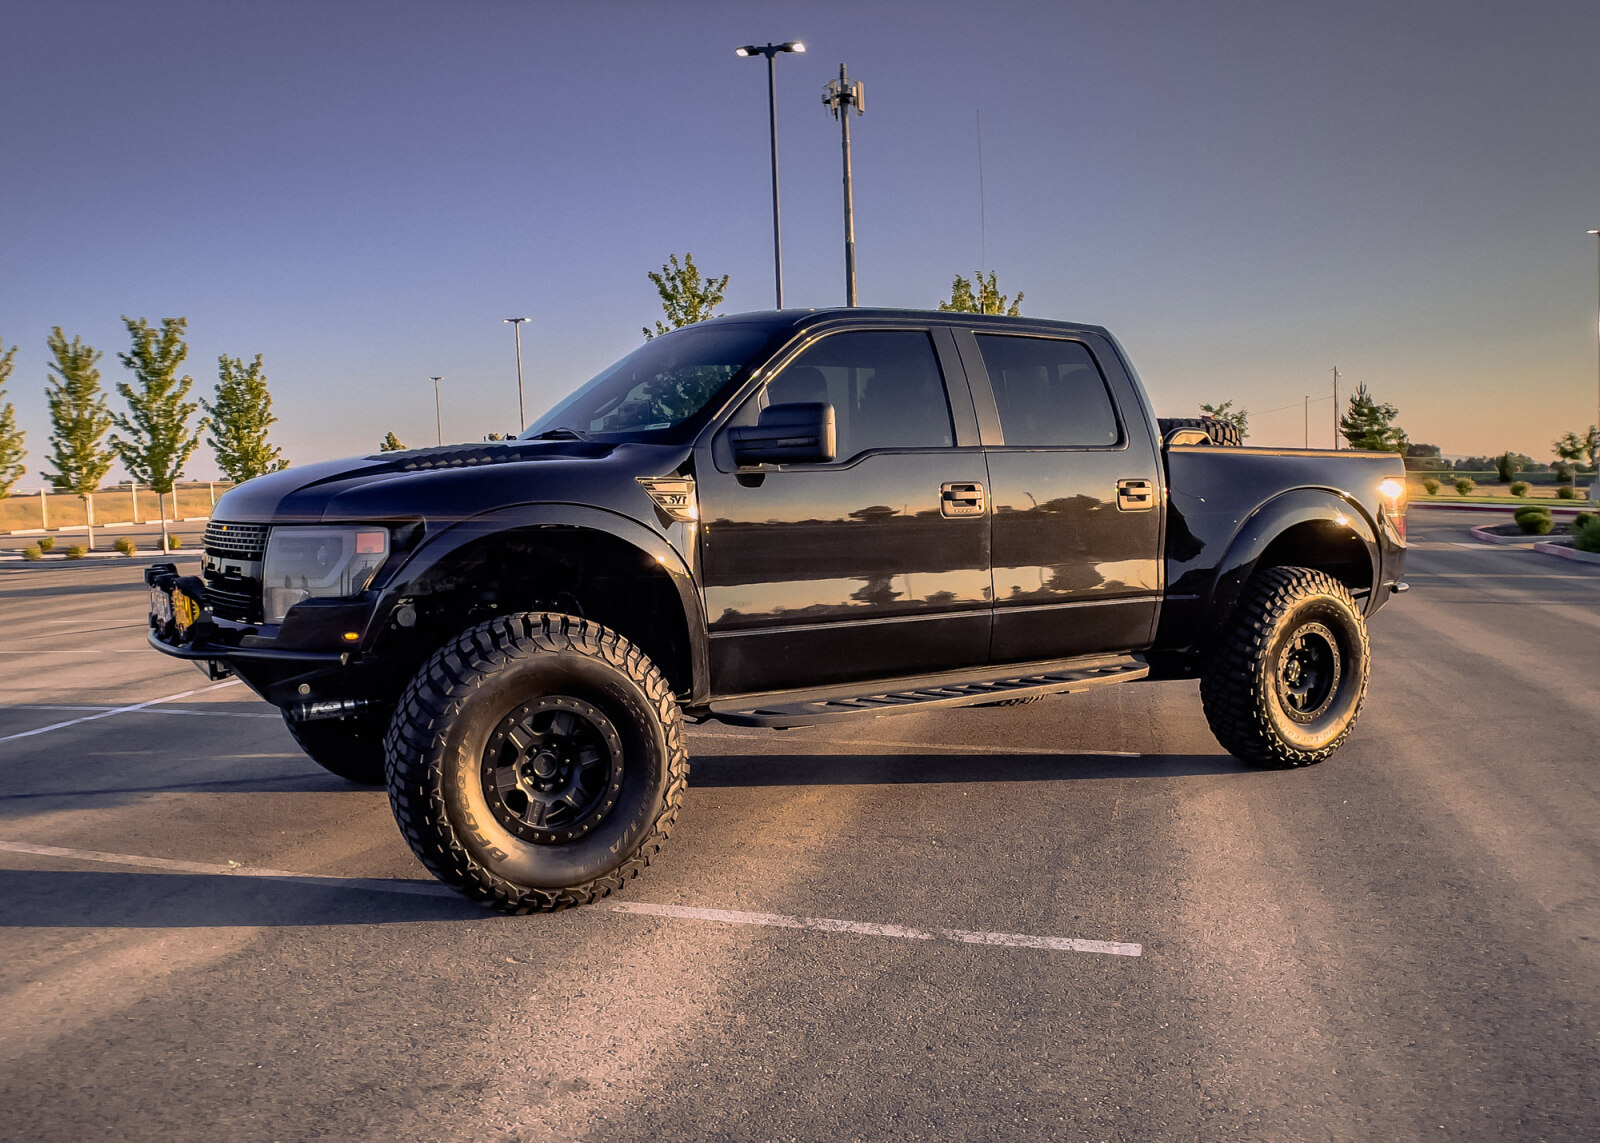 For Sale: 2014 Ford F150 SVC-Linked Raptor (Pre-Runner / Daily Driver) *PRICE REDUCED* - photo14